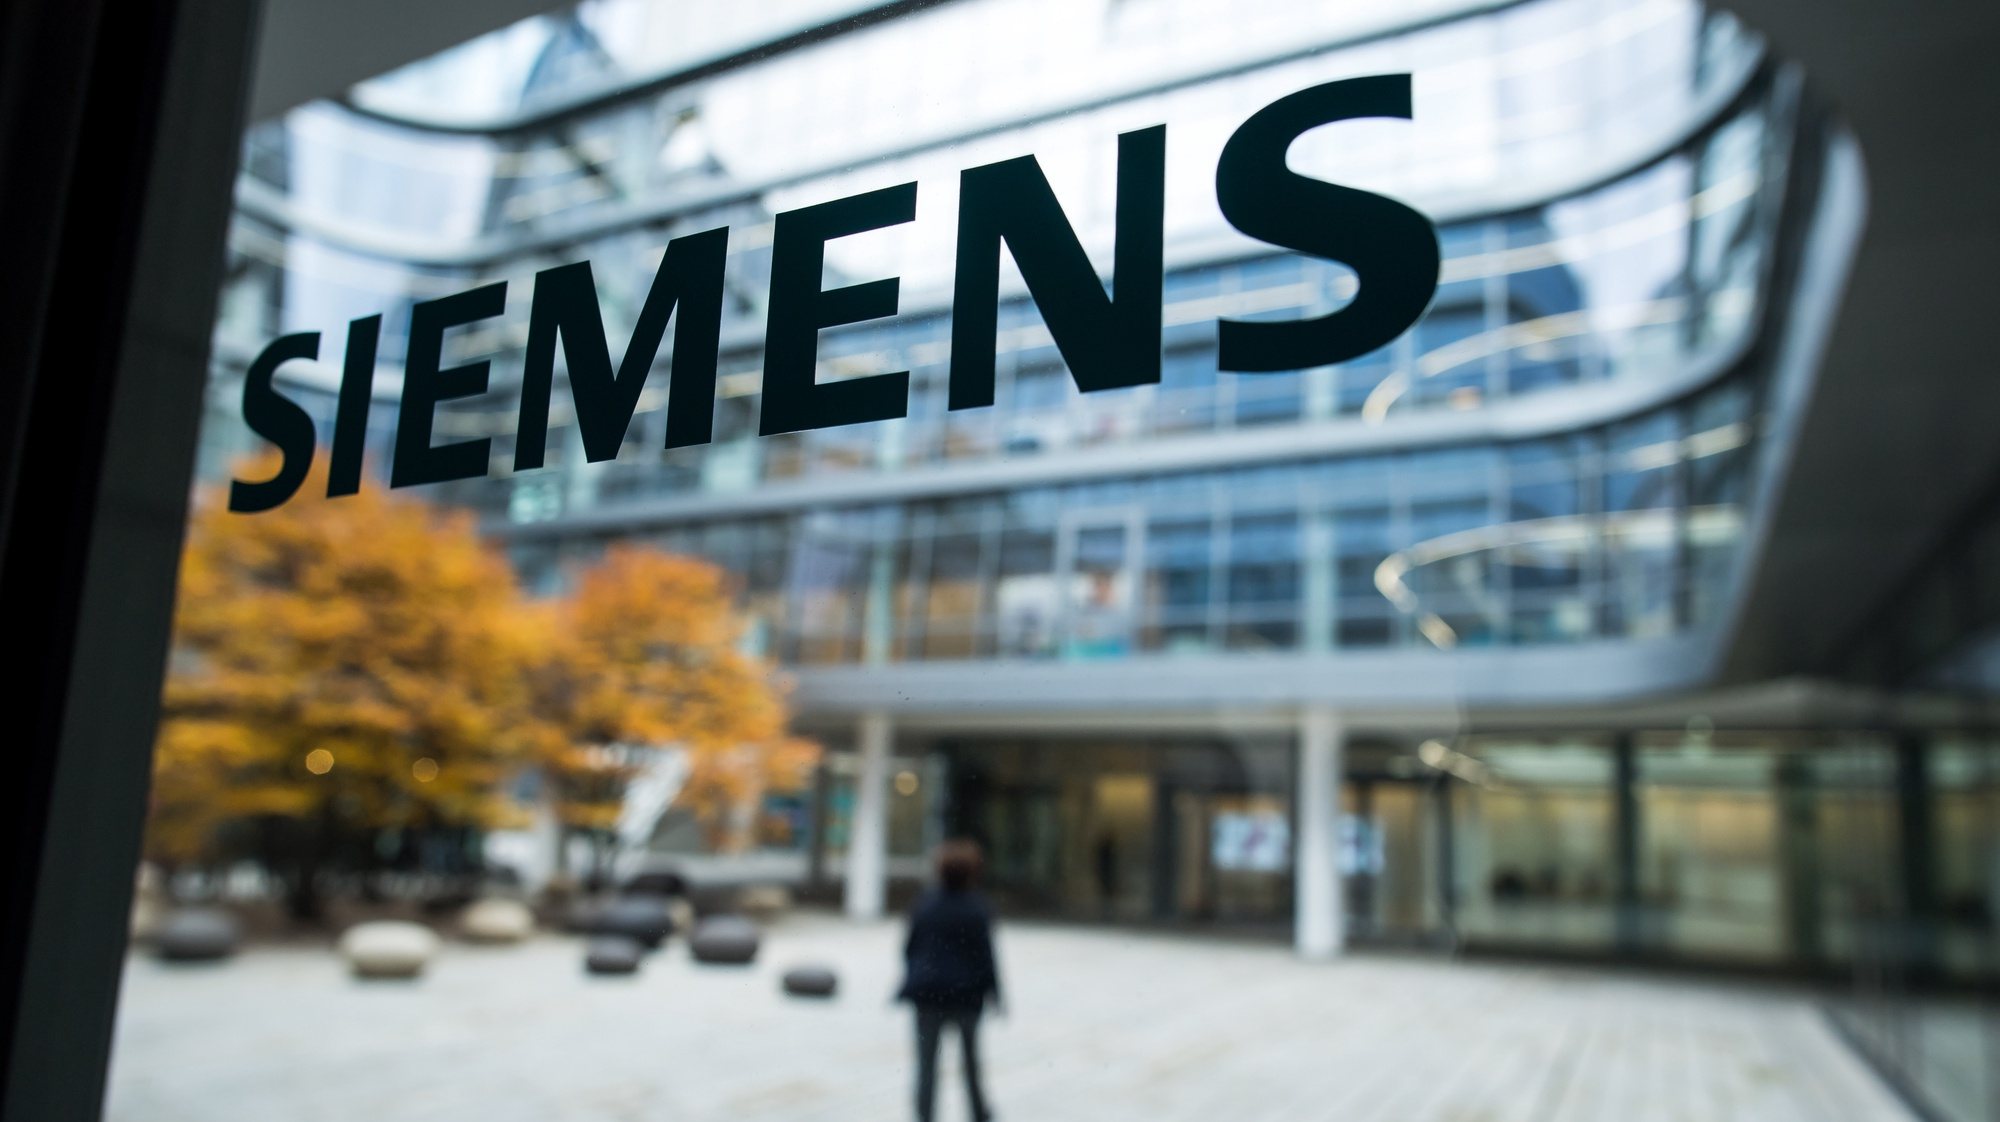 epa08984443 (FILE) - A logo of Siemens AG in front of the headquarters during the annual news conference in Munich, Bavaria, Germany 09 November 2017 (re-issued on 03 February 2021). Siemens will publish its 1st quarter results for fiscal year 2021 and host a virtual Annual General Meeting for fiscal year 2020 on 03 February 2021.  EPA/LUKAS BARTH *** Local Caption *** 54077530